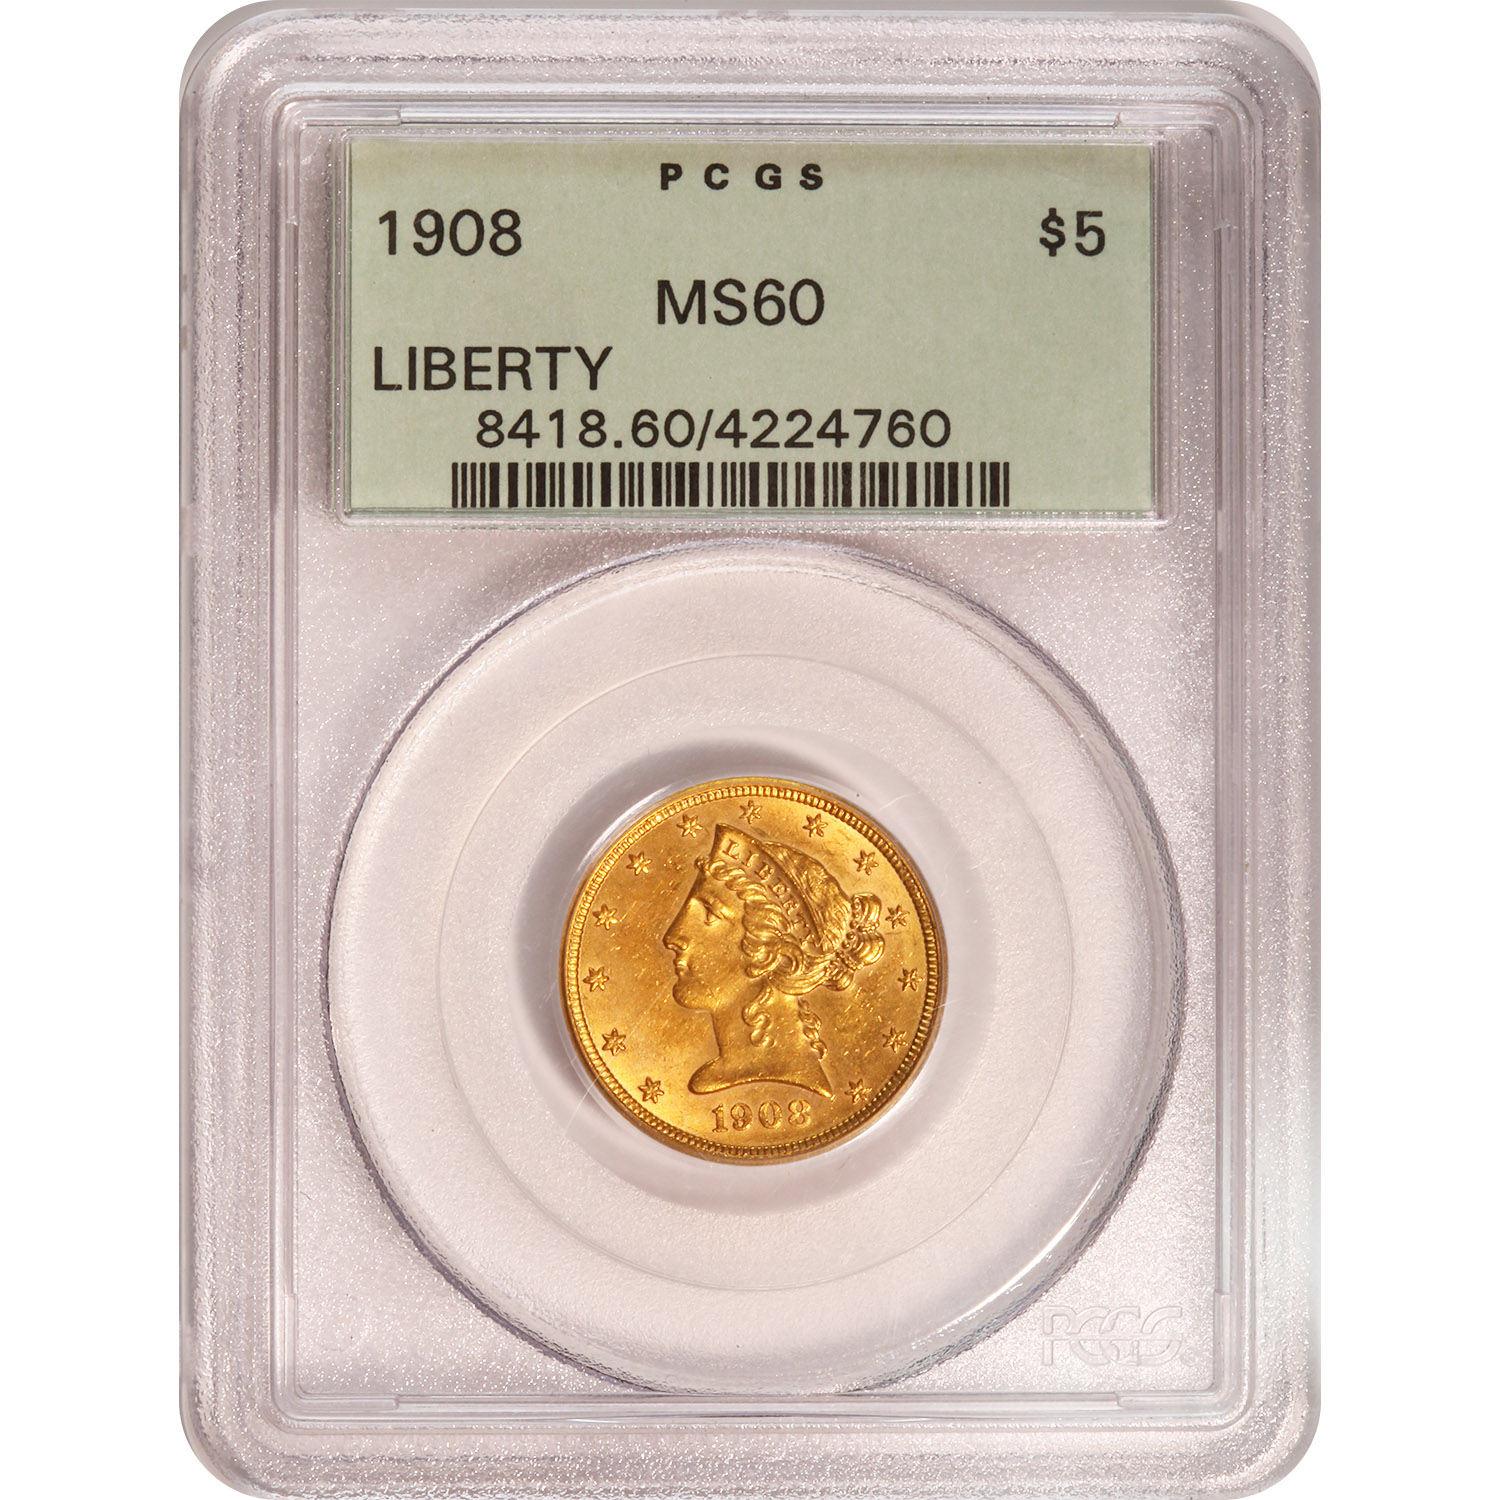 Certified $5 Gold Liberty 1908 MS60 PCGS